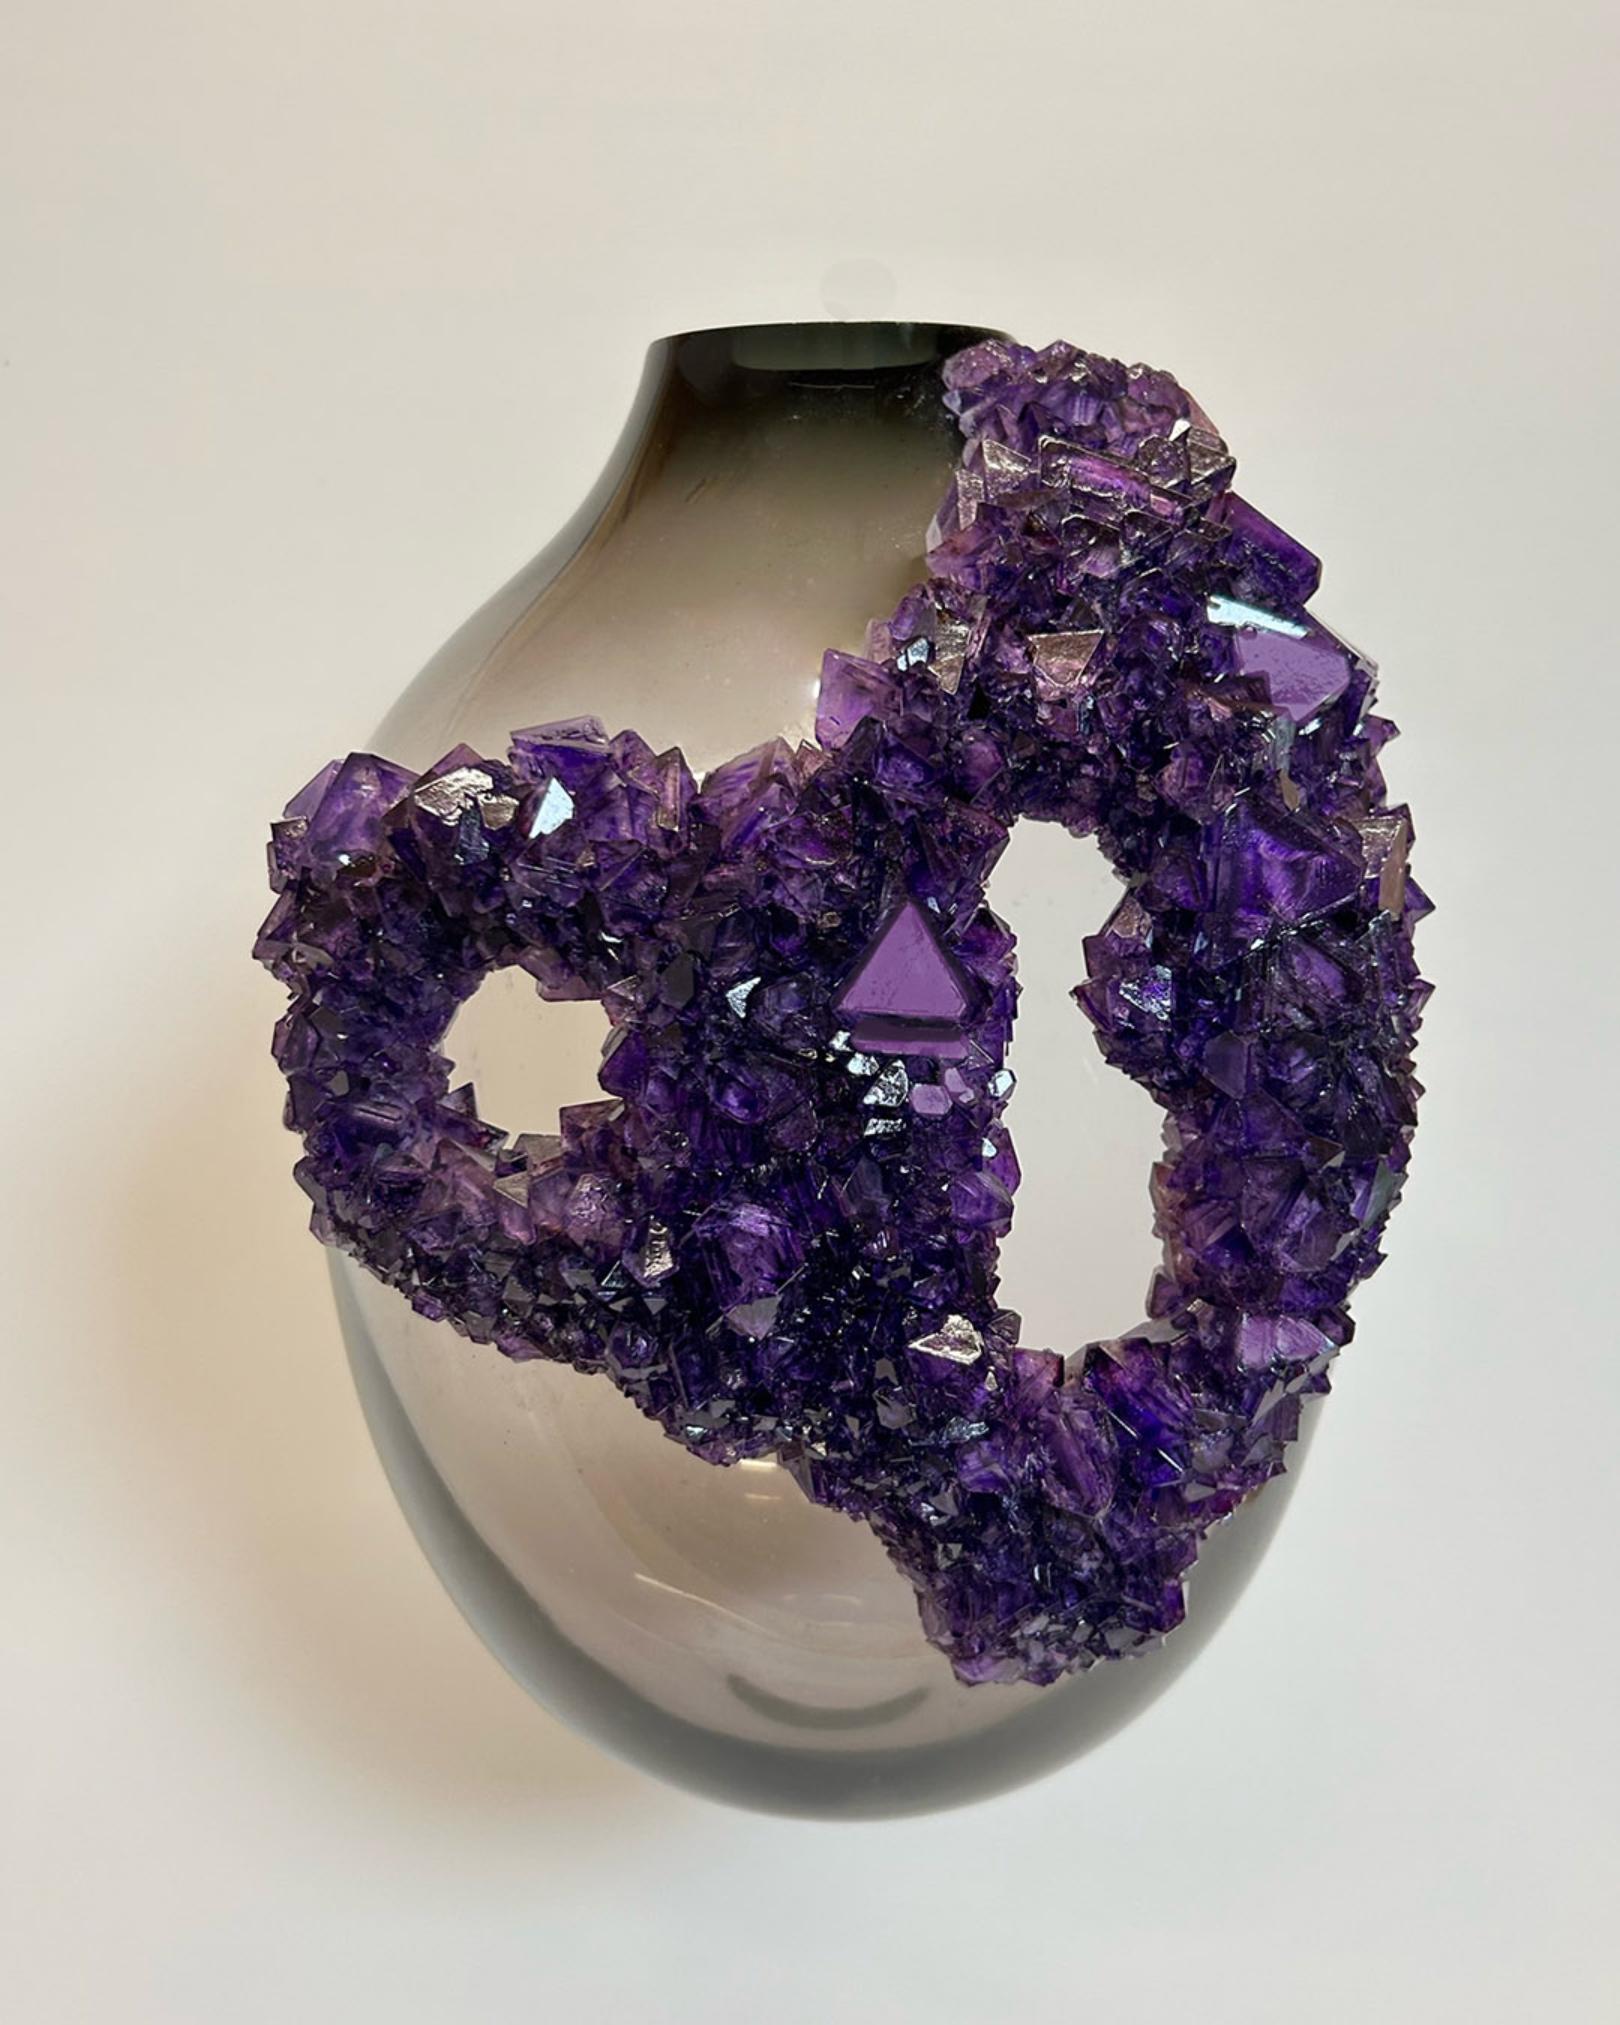 Emperors Breath Vessel 4 by Mark Sturkenboom
Dimensions: W 45 x D 25 x H 30 cm
Materials: Mouth Blown Glass, Overgrown Crystals


Mark Sturkenboom (Driebergen, 1983) is an artist that graduated with honors in 2012 at Artez Academy for the Arts in